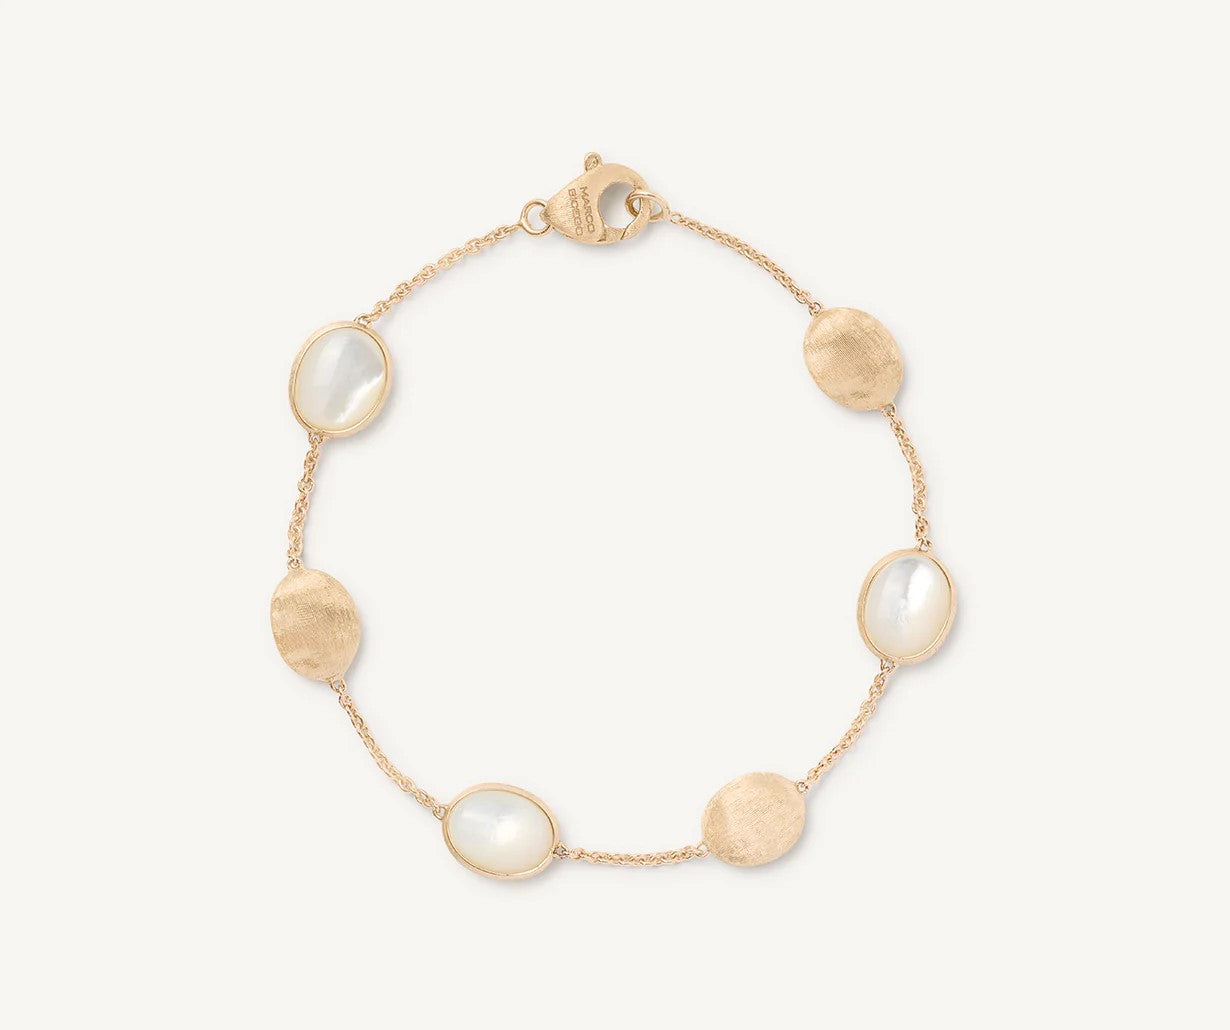 18K YELLOW GOLD MOTHER OF PEARL & GOLD BRACELET FROM THE SIVIGLIA COLLECTION